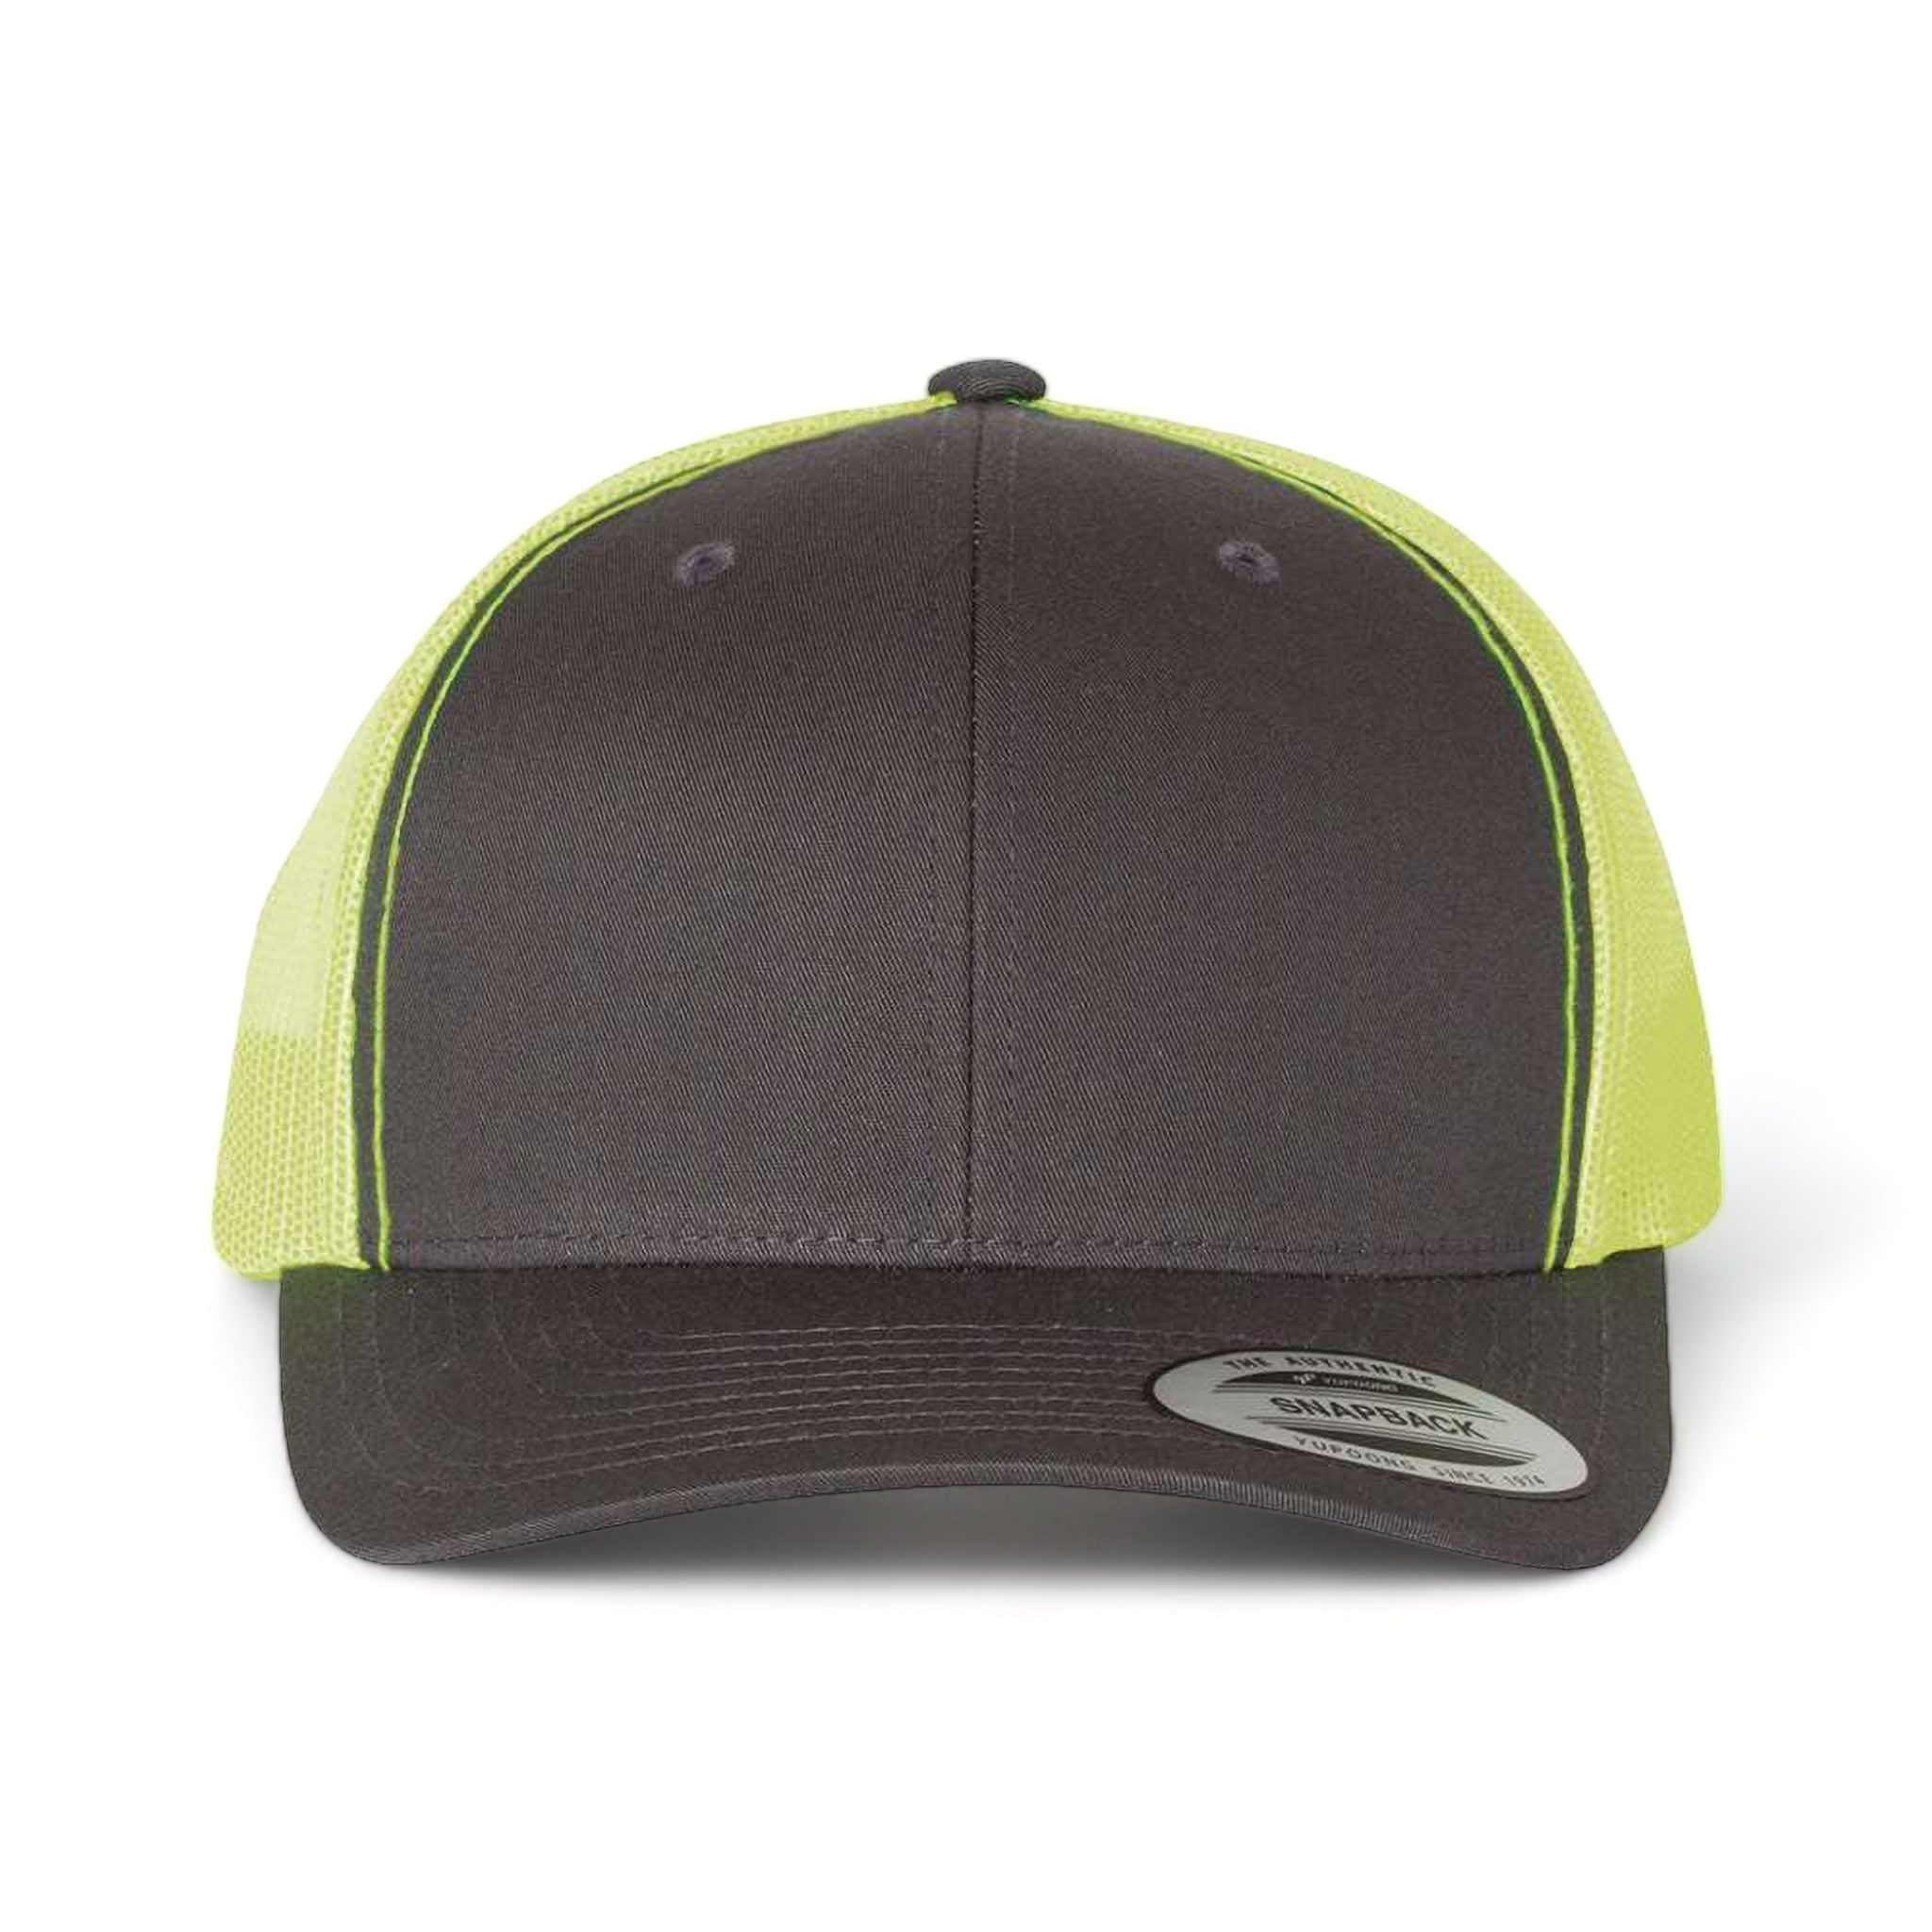 Front view of YP Classics 6606 custom hat in charcoal and neon green